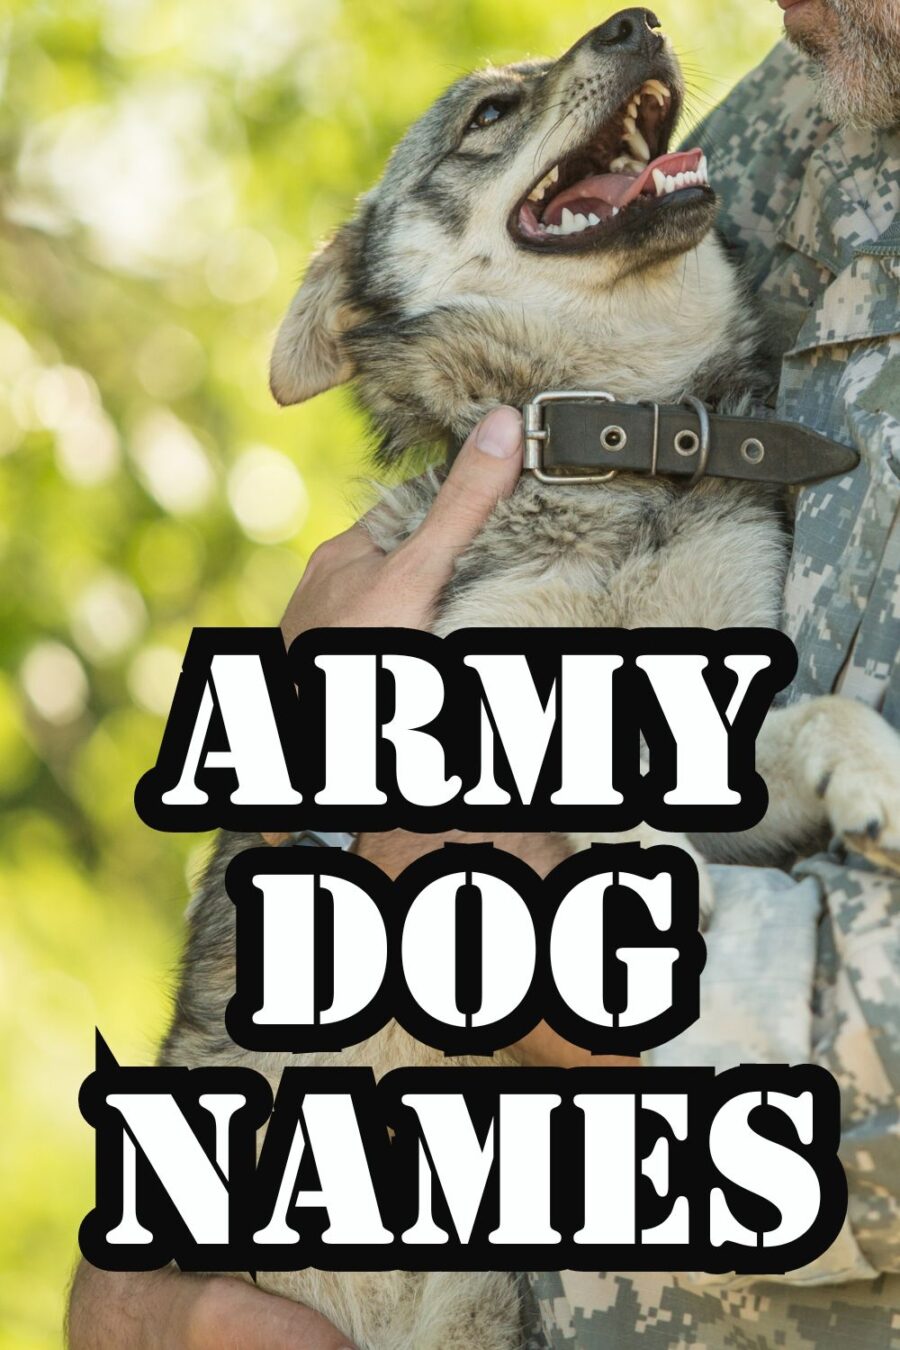 Image of soldier in camo holding a puppy with "army dog names" in lower half of photo